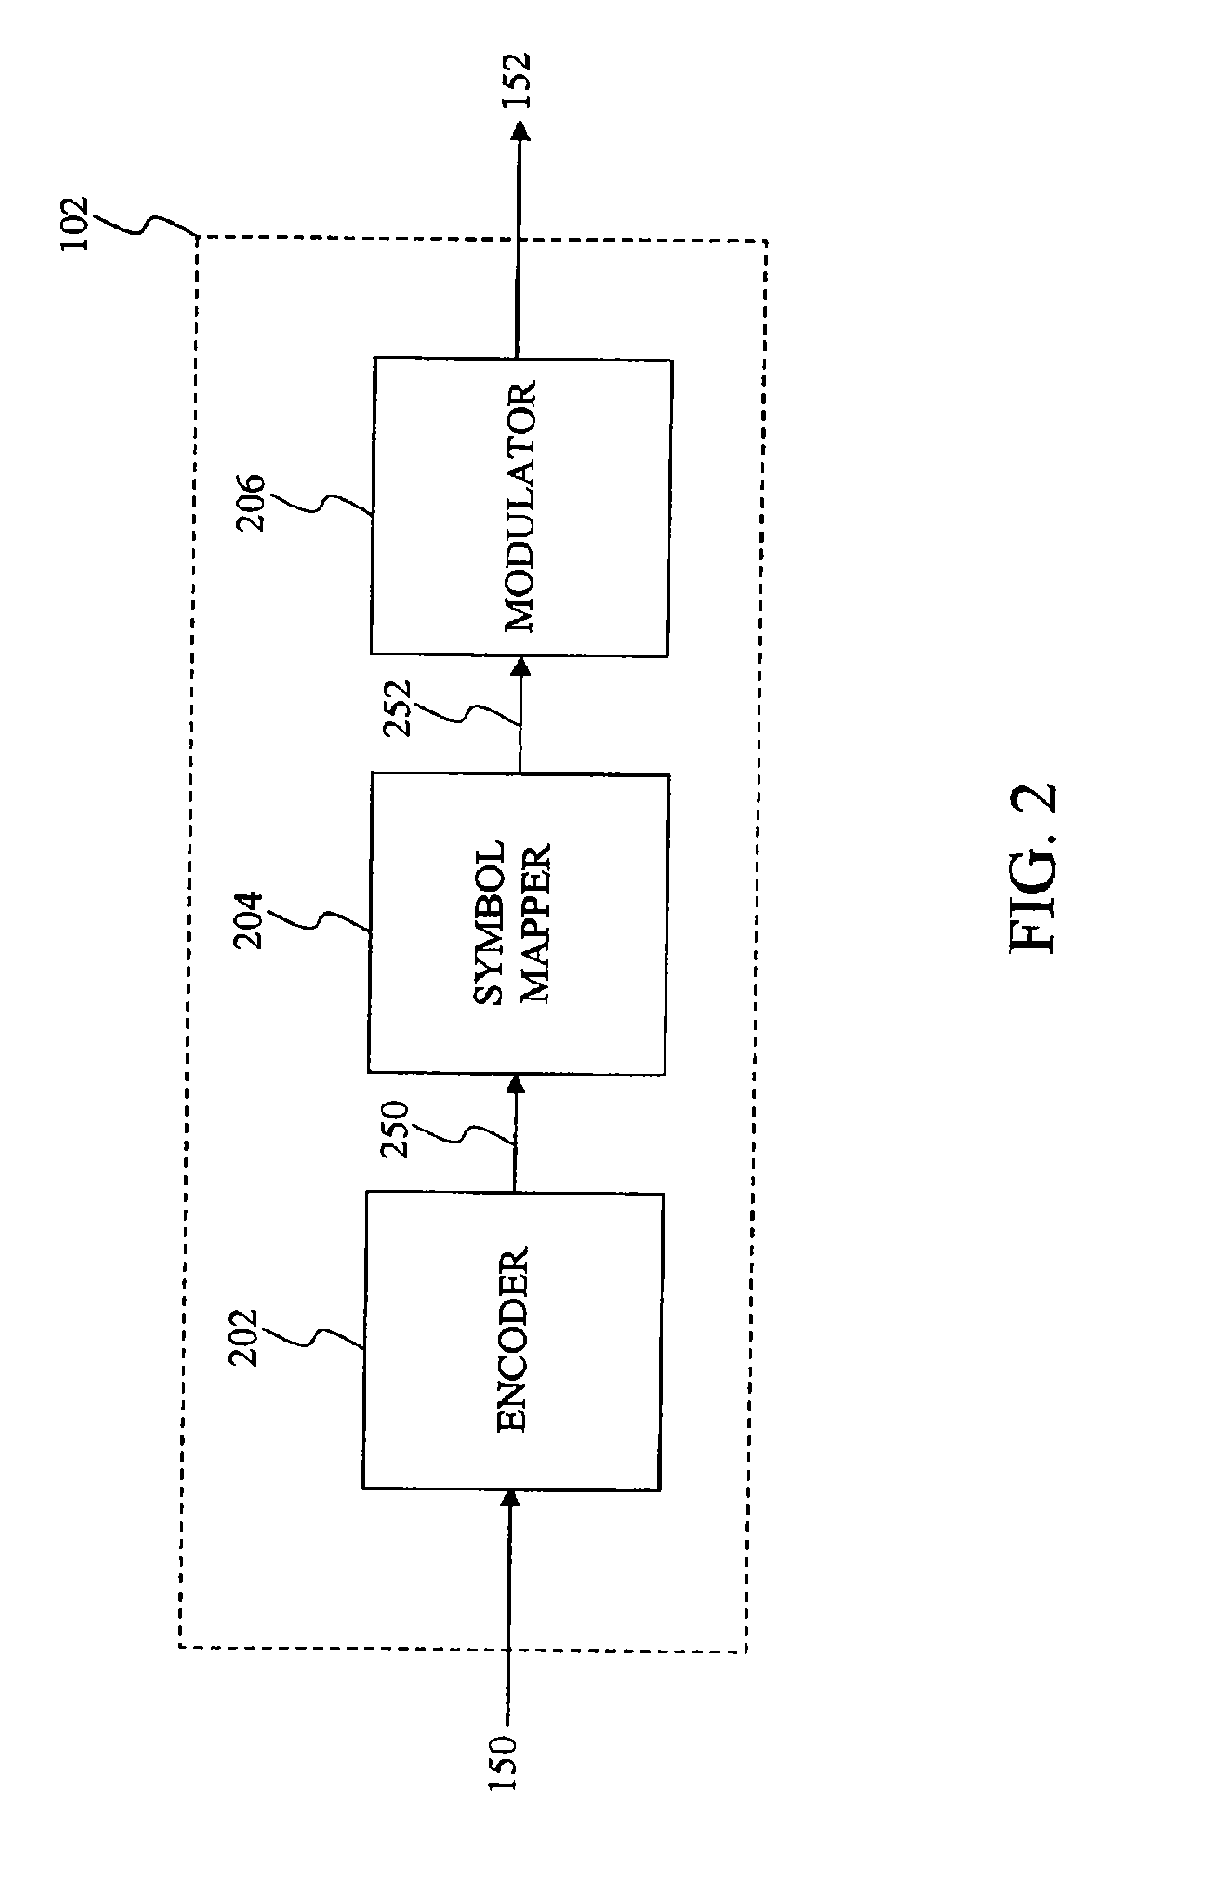 Low Density Parity Check (LDPC) Encoded Higher Order Modulation